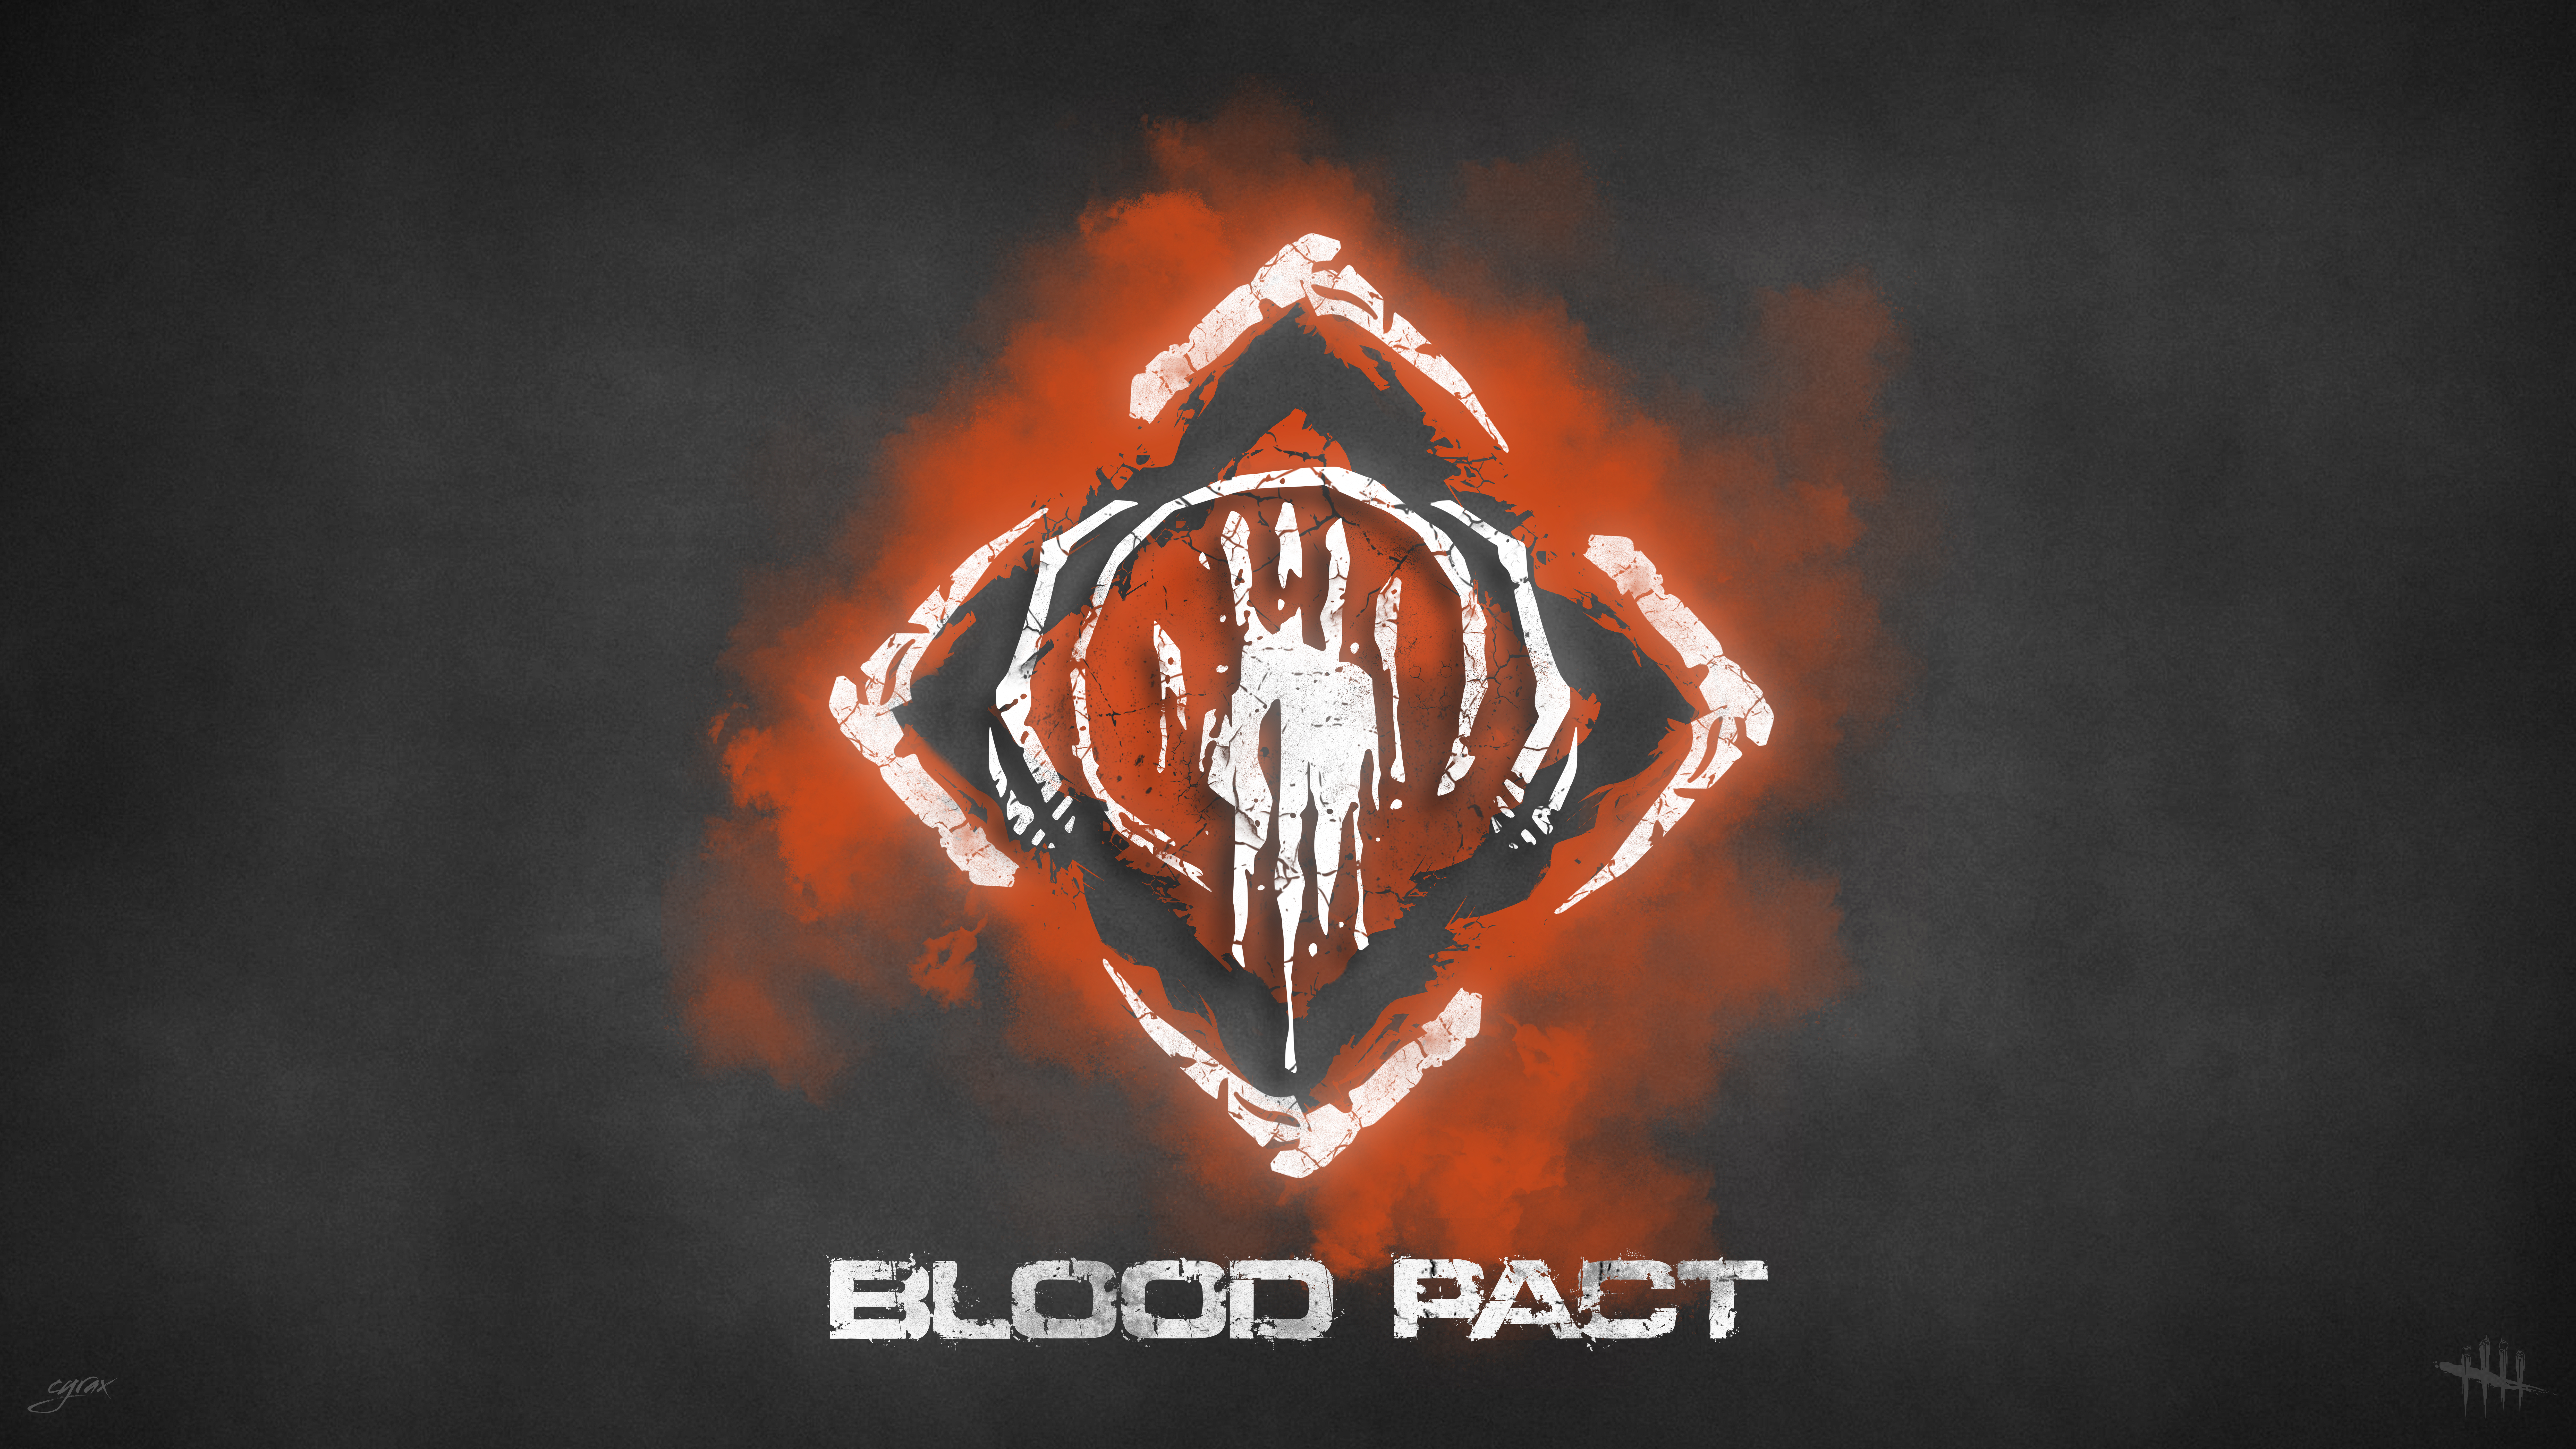 Blood Pact by Cyrax